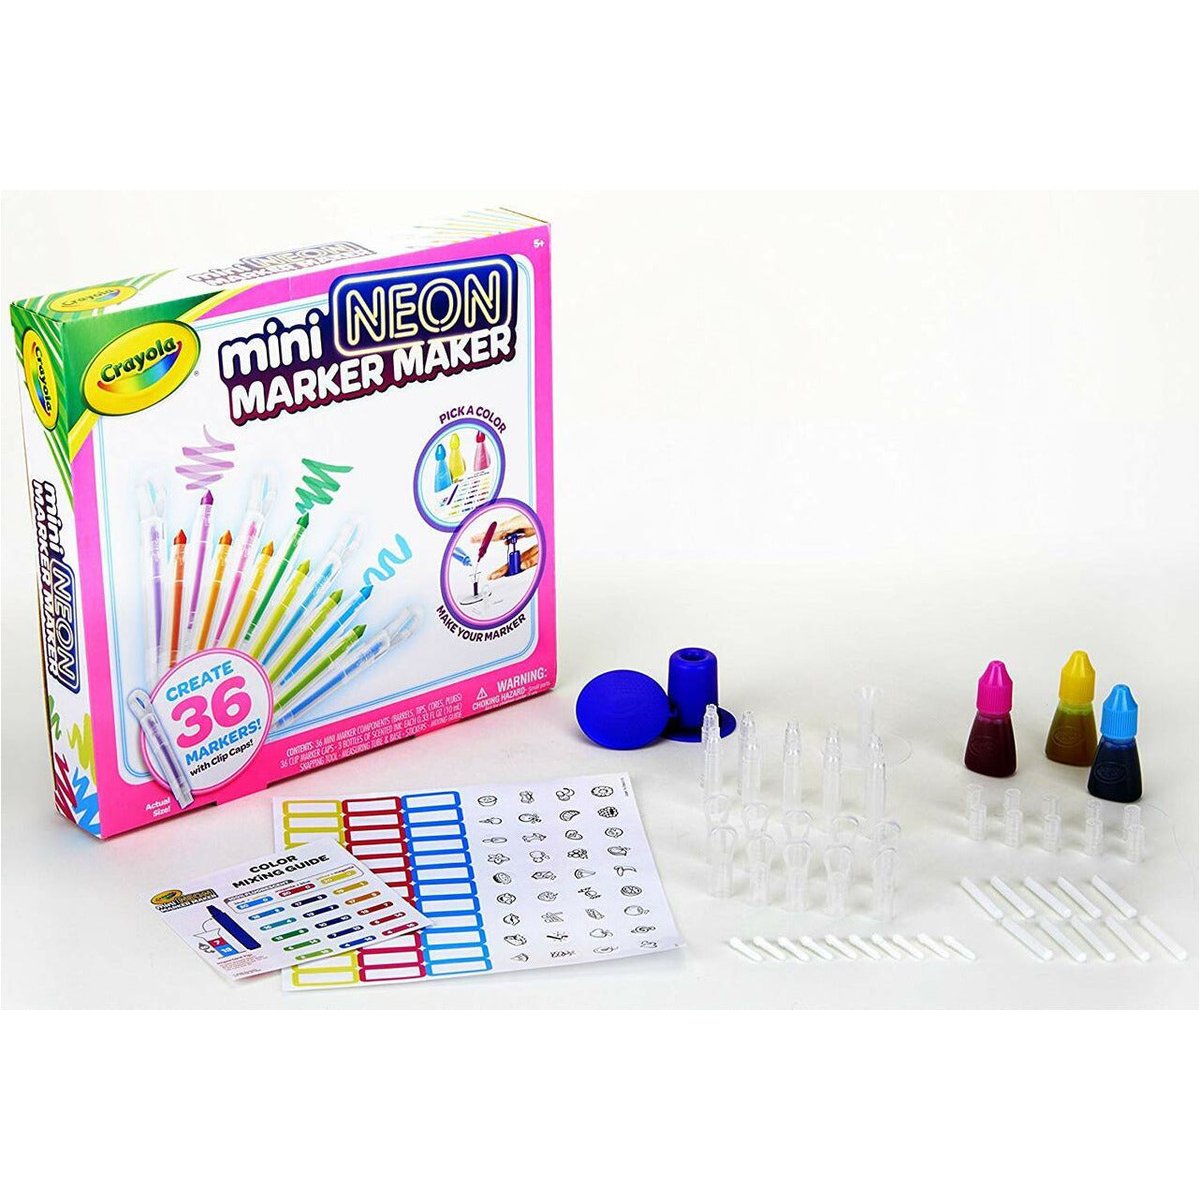 Crayola mini Neon Marker Maker - 36 Markers with Clips Caps